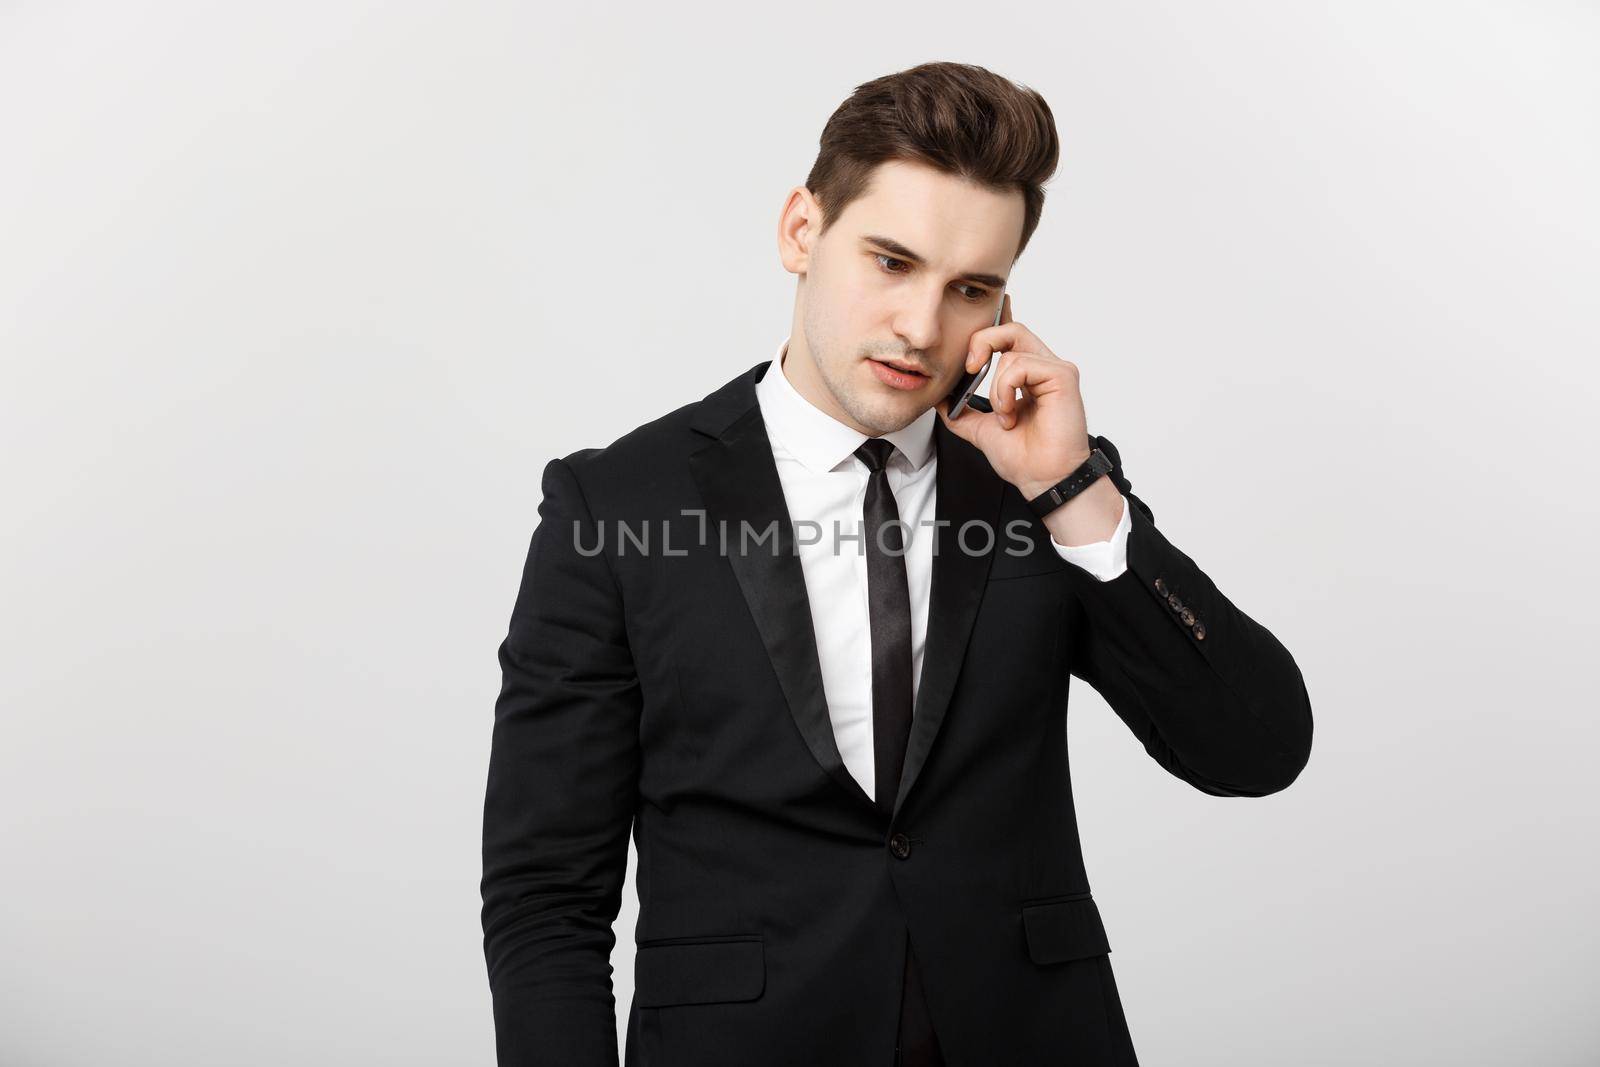 Business Concept: Portrait of young handsome businessman talking on mobile phone with serious and stress expression. Isolated over white background